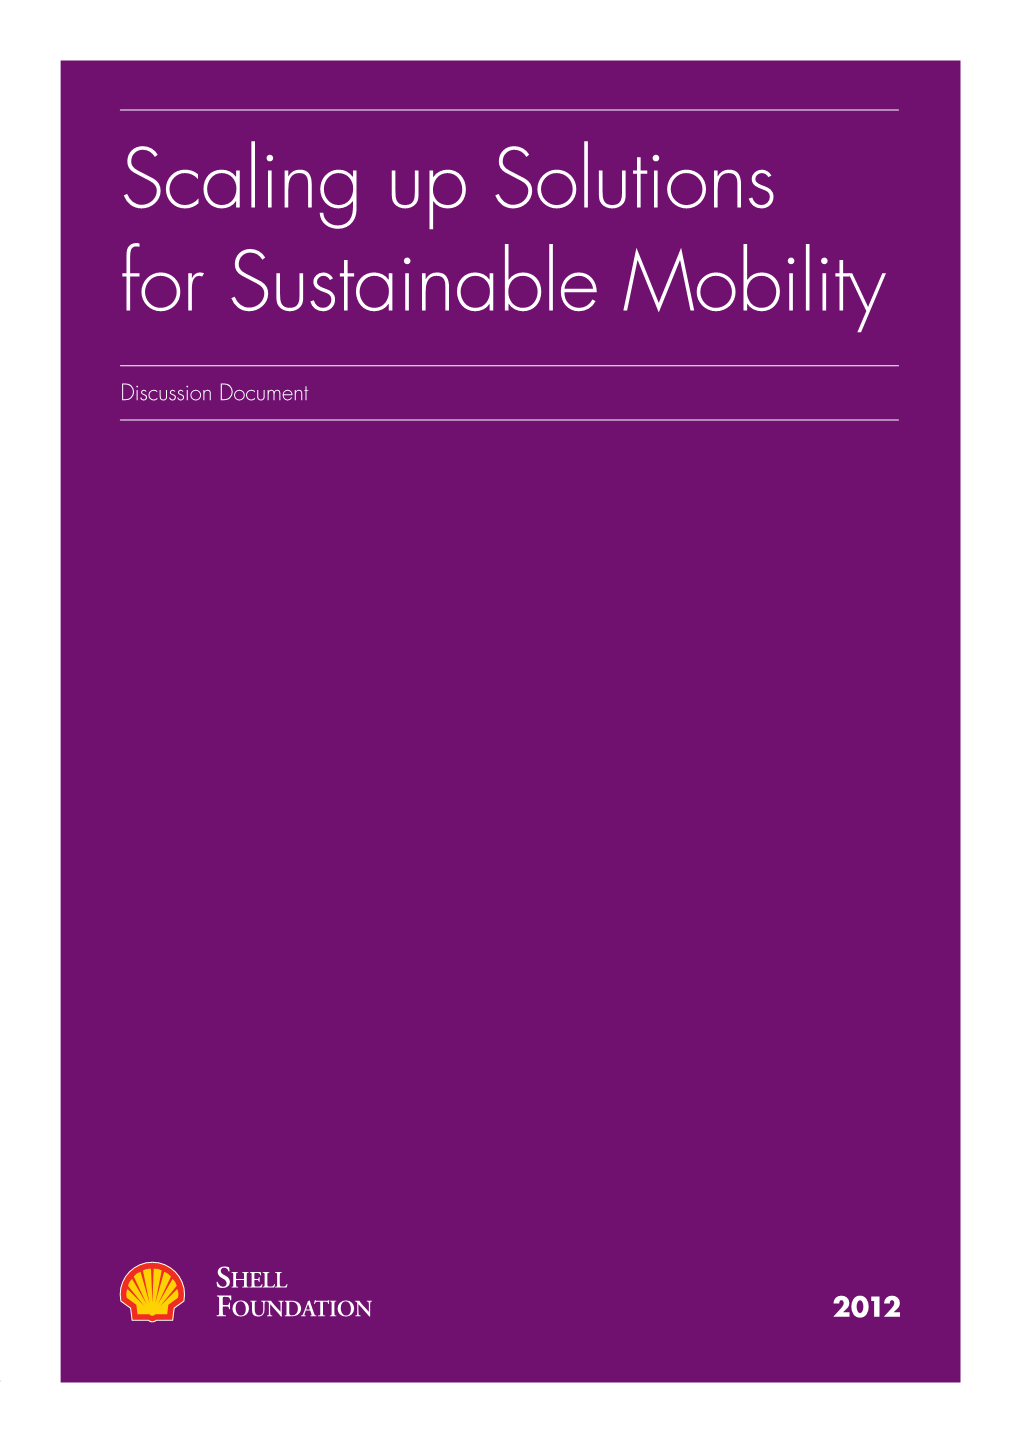 Scaling up Solutions for Sustainable Mobility